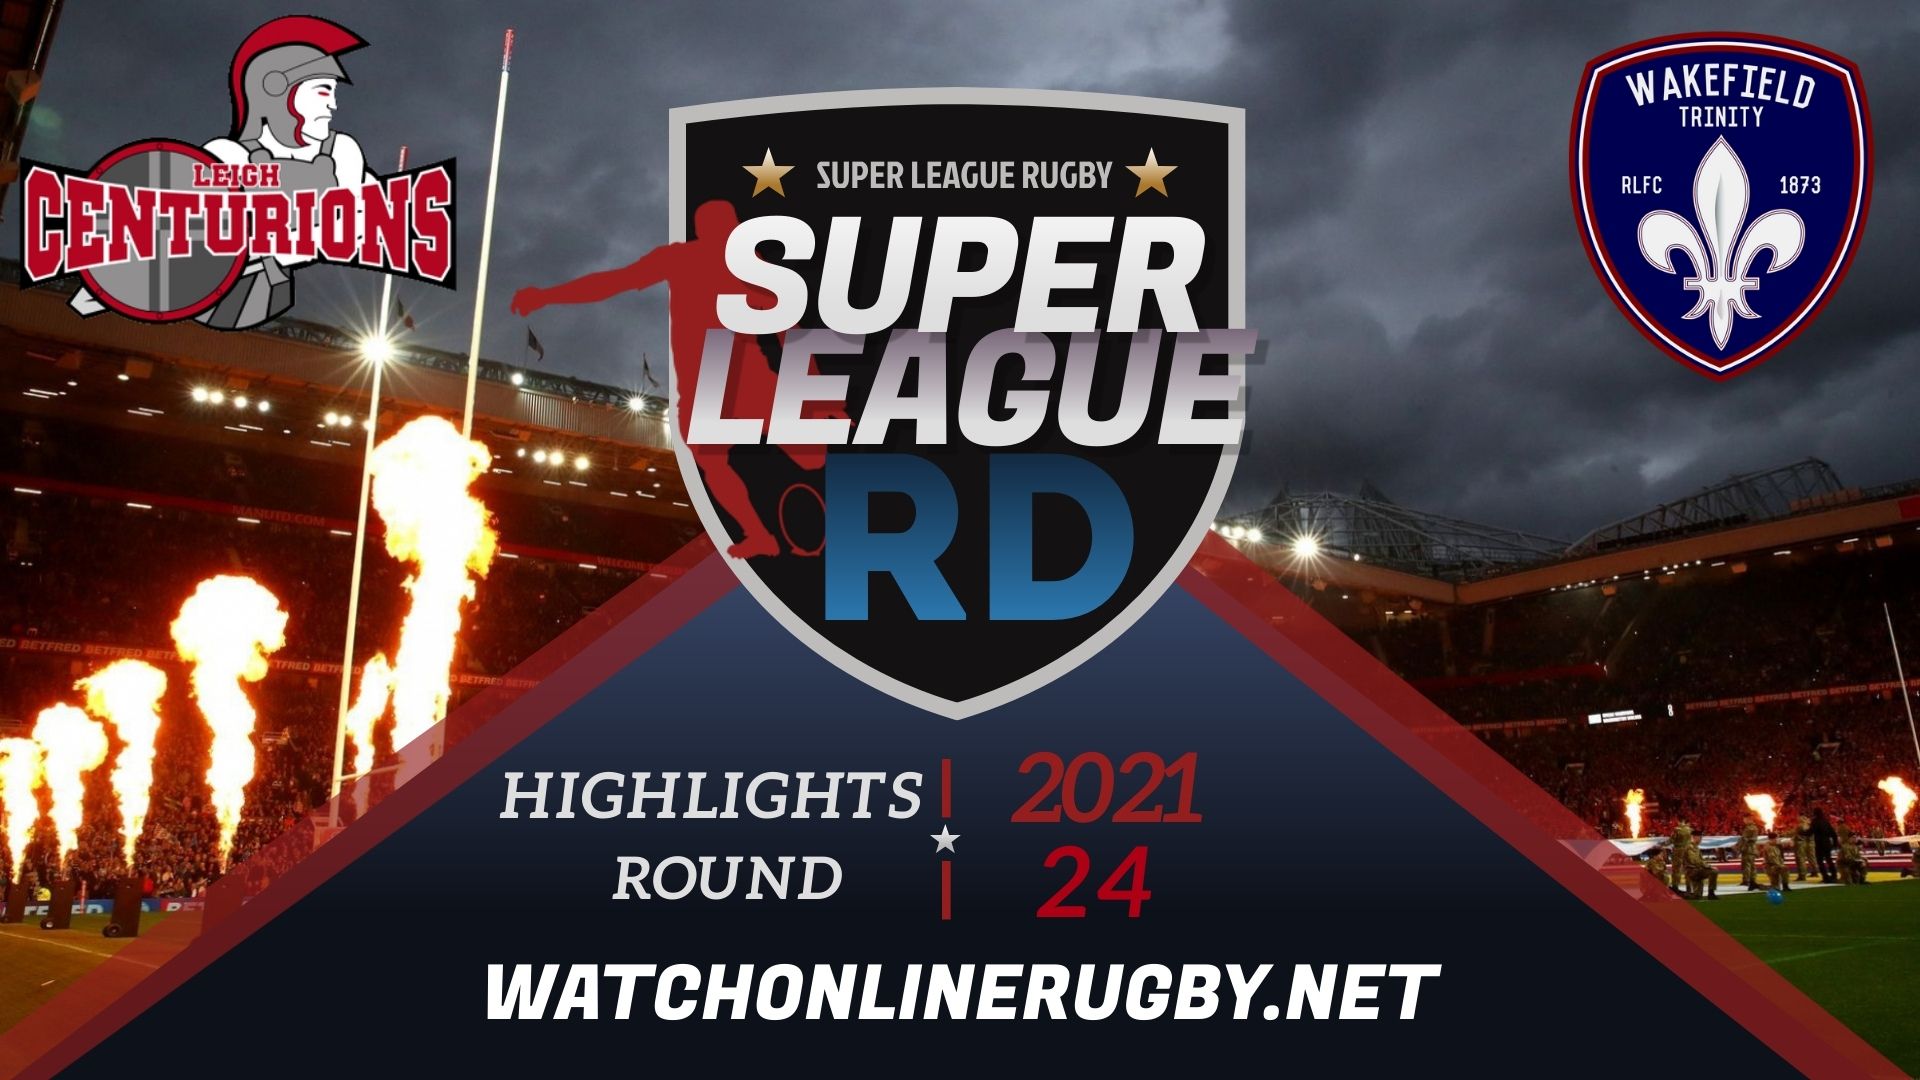 Leigh Centurions Vs Wakefield Trinity Super League Rugby 2021 RD 24